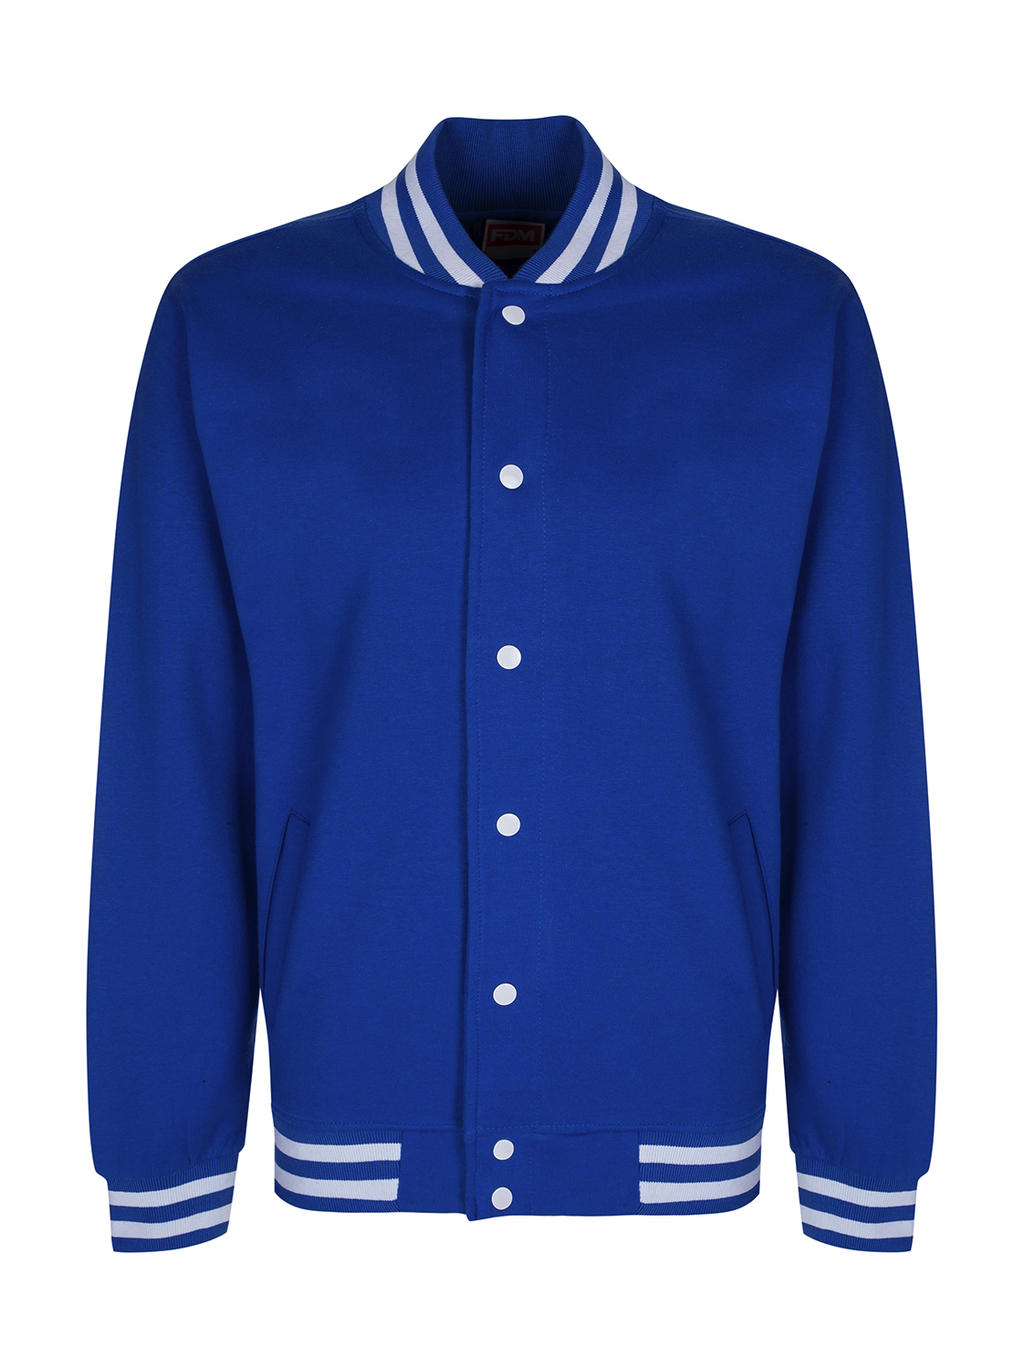  Campus Jacket in Farbe Royal/White